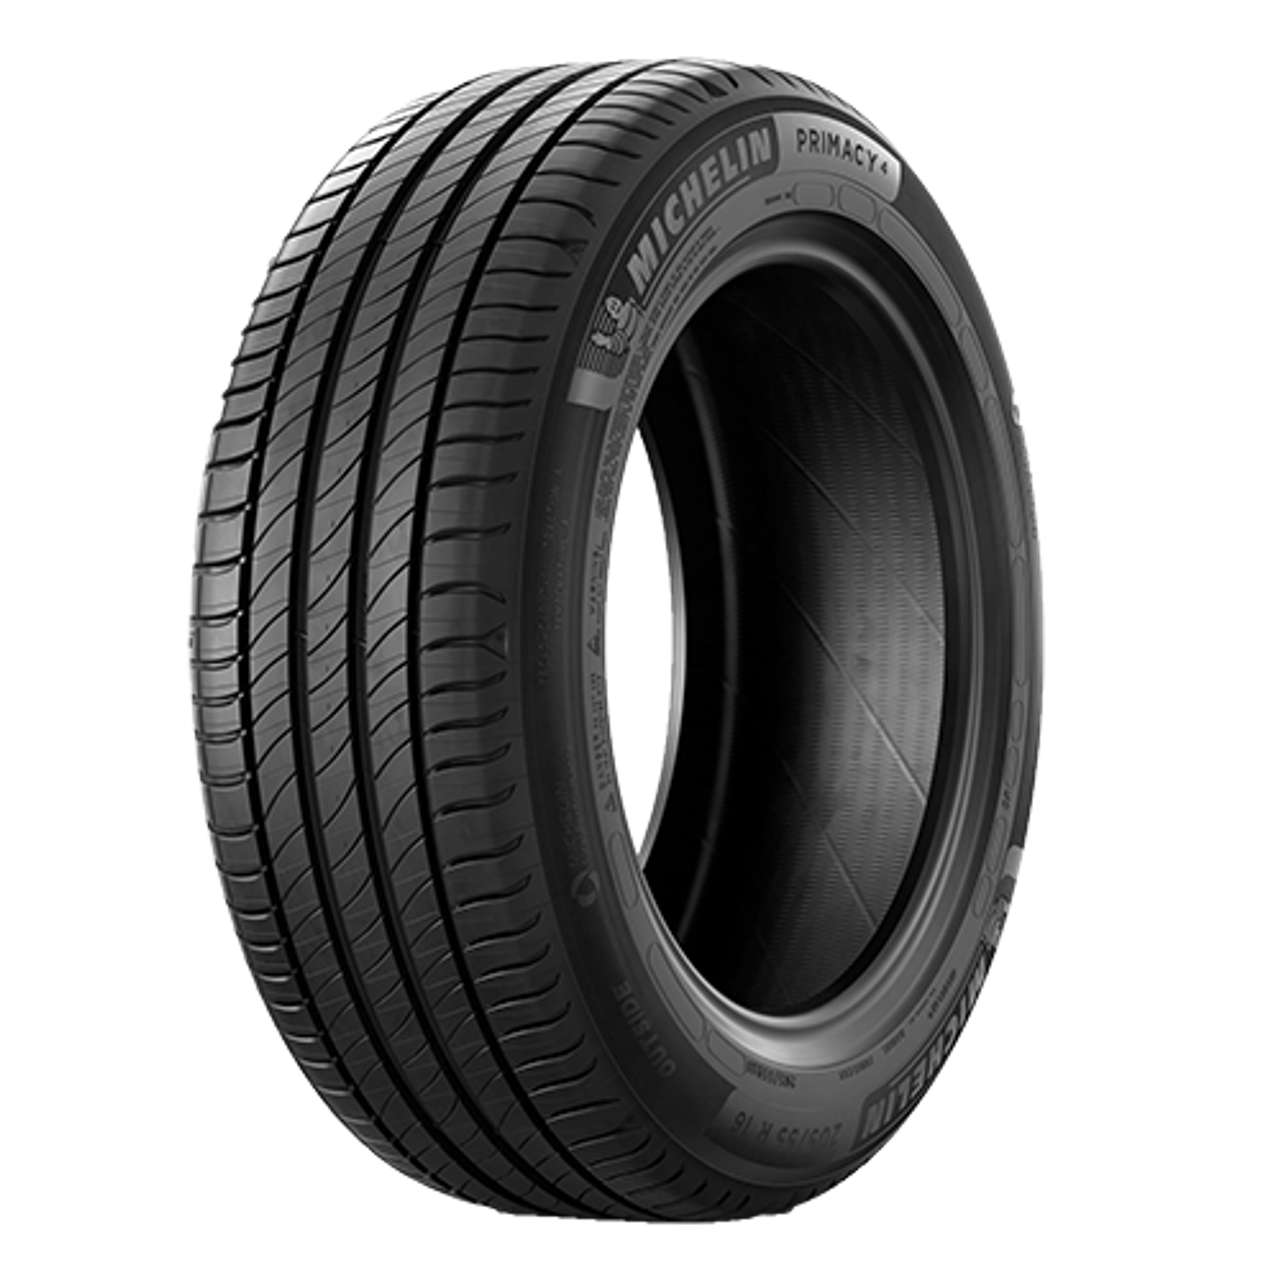 MICHELIN PRIMACY 4 175/65R15 84H BSW